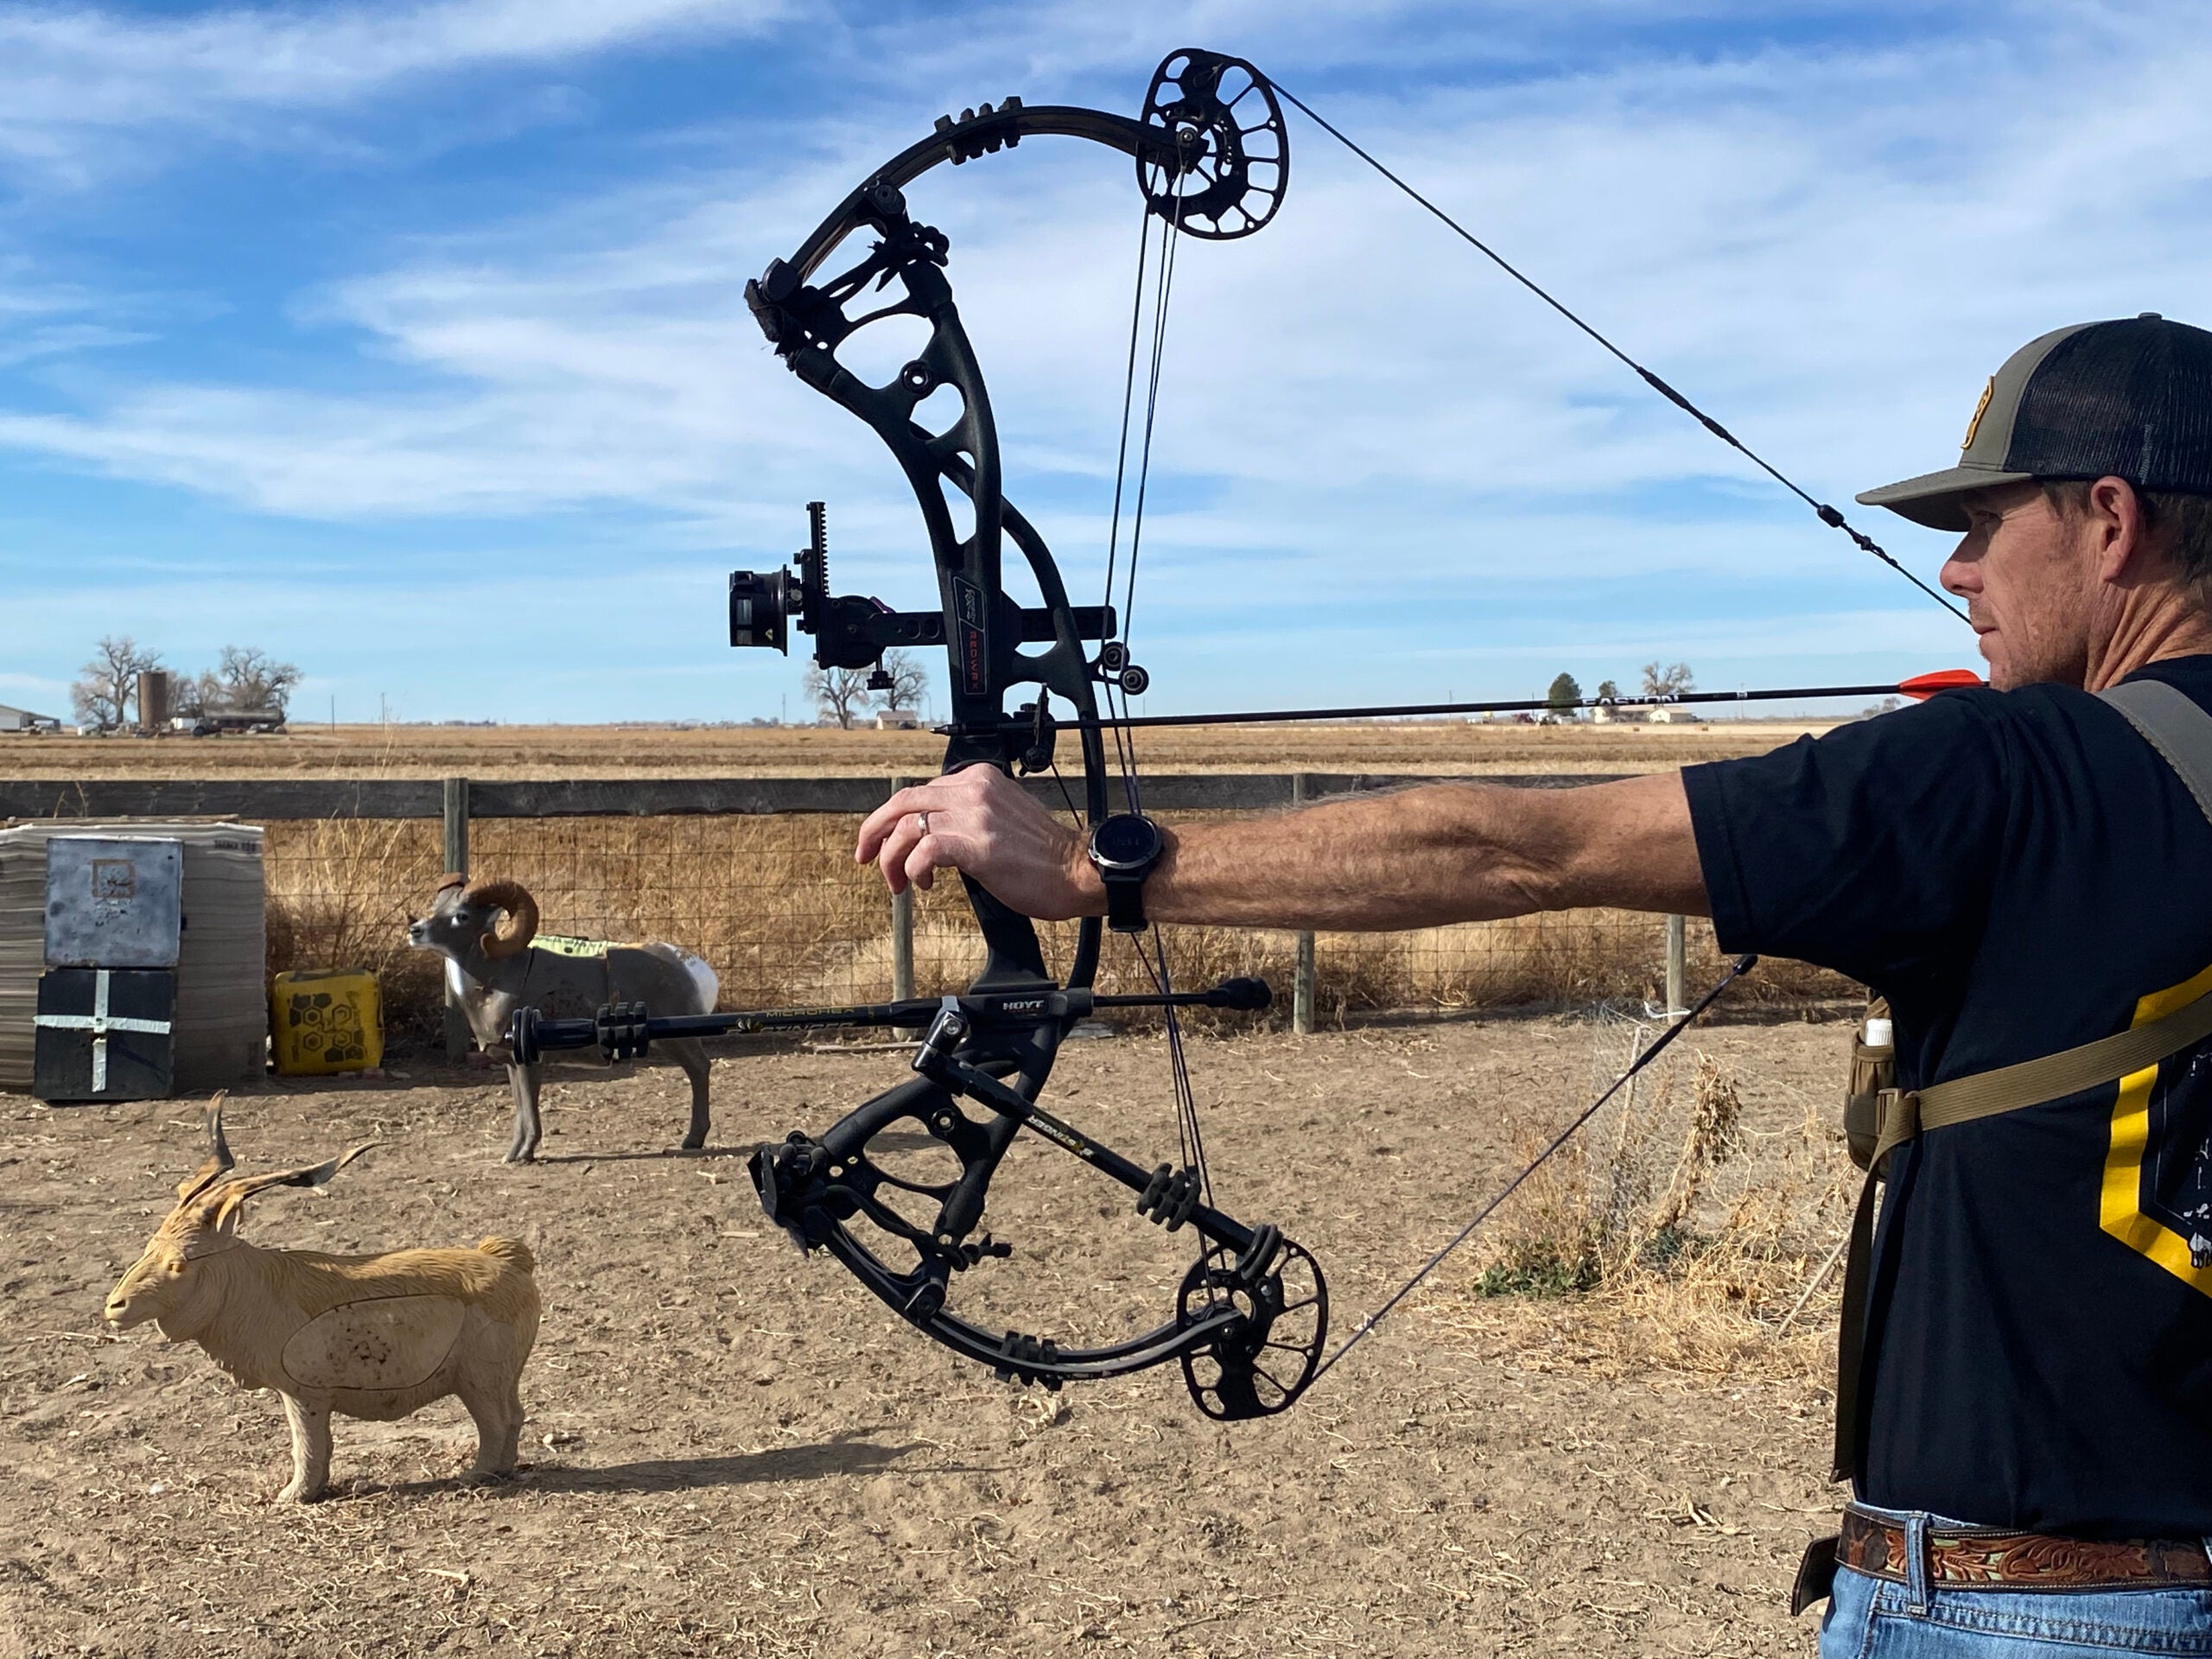 Paper Tune Your Bow for Perfect In-Field Arrow Flight